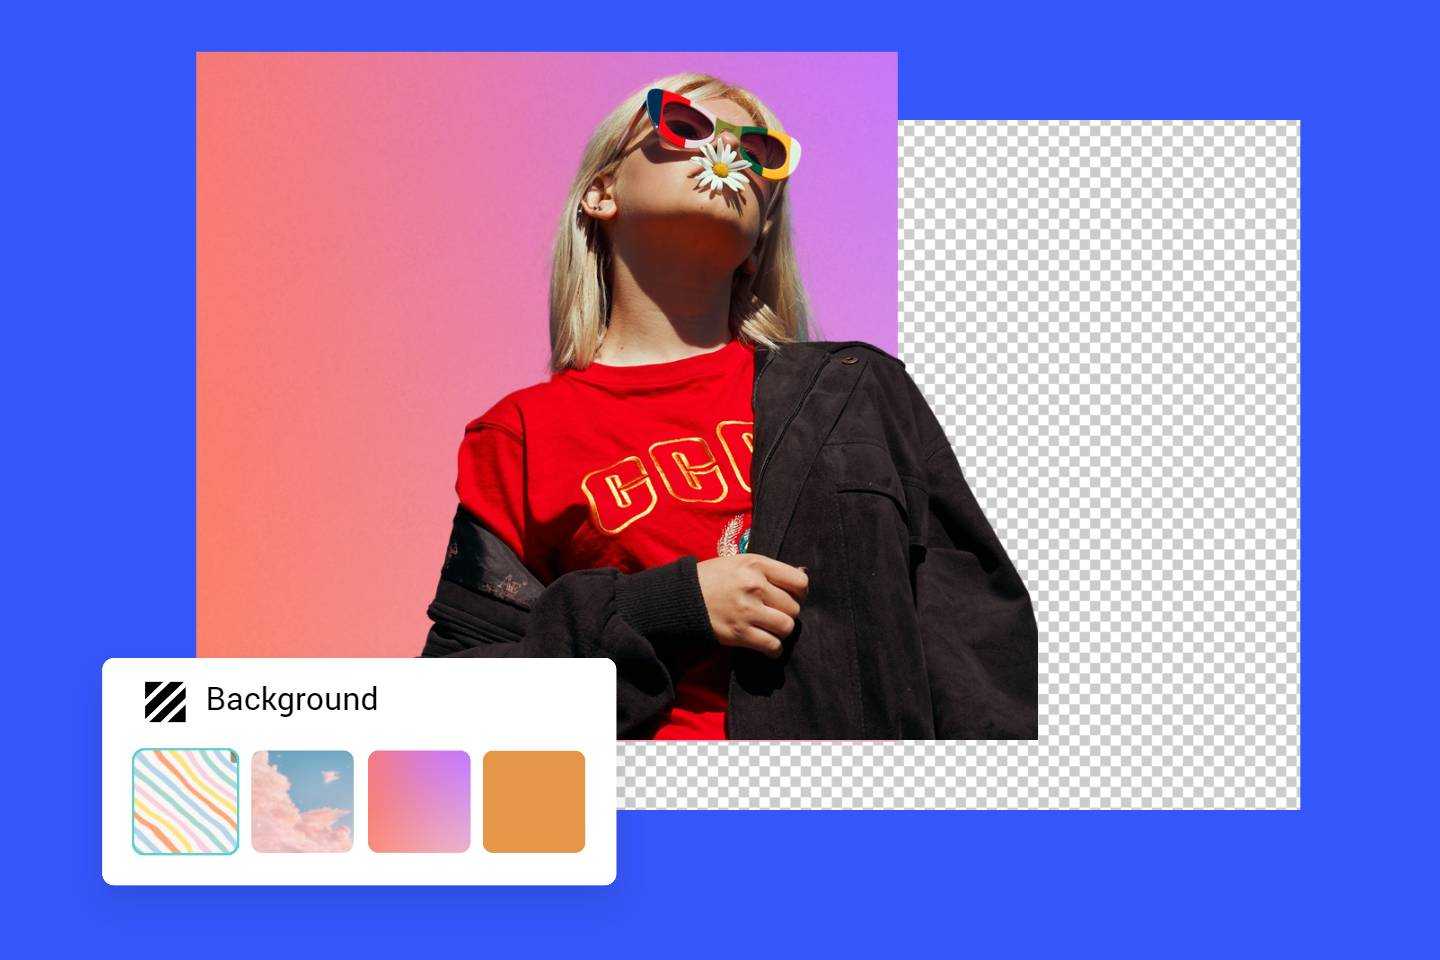 Explore the new era of Photo background editing new - Make your photos look amazing